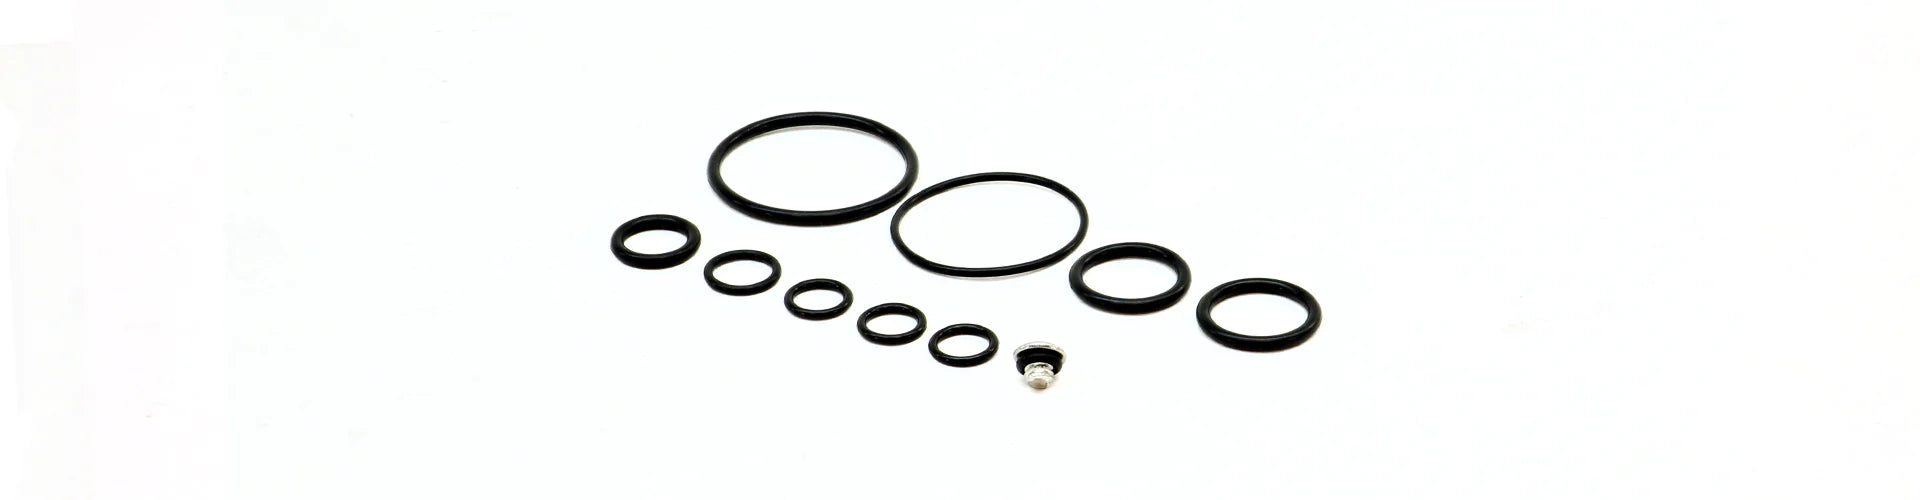 PolarStar Complete O-Ring and Screw Set, JACK (MP7 Excluded) - ssairsoft